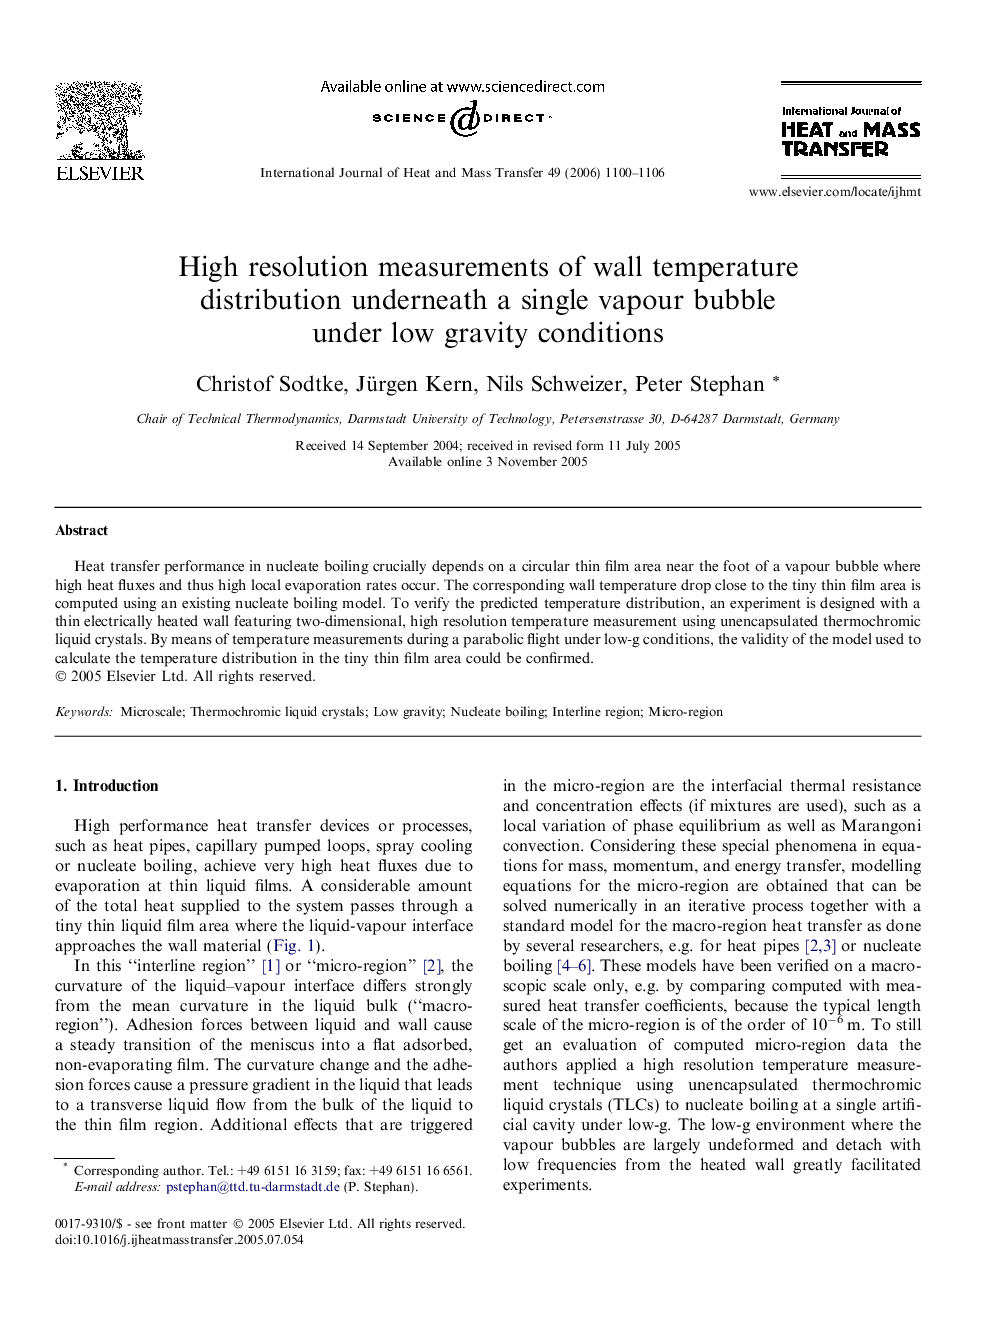 High resolution measurements of wall temperature distribution underneath a single vapour bubble under low gravity conditions